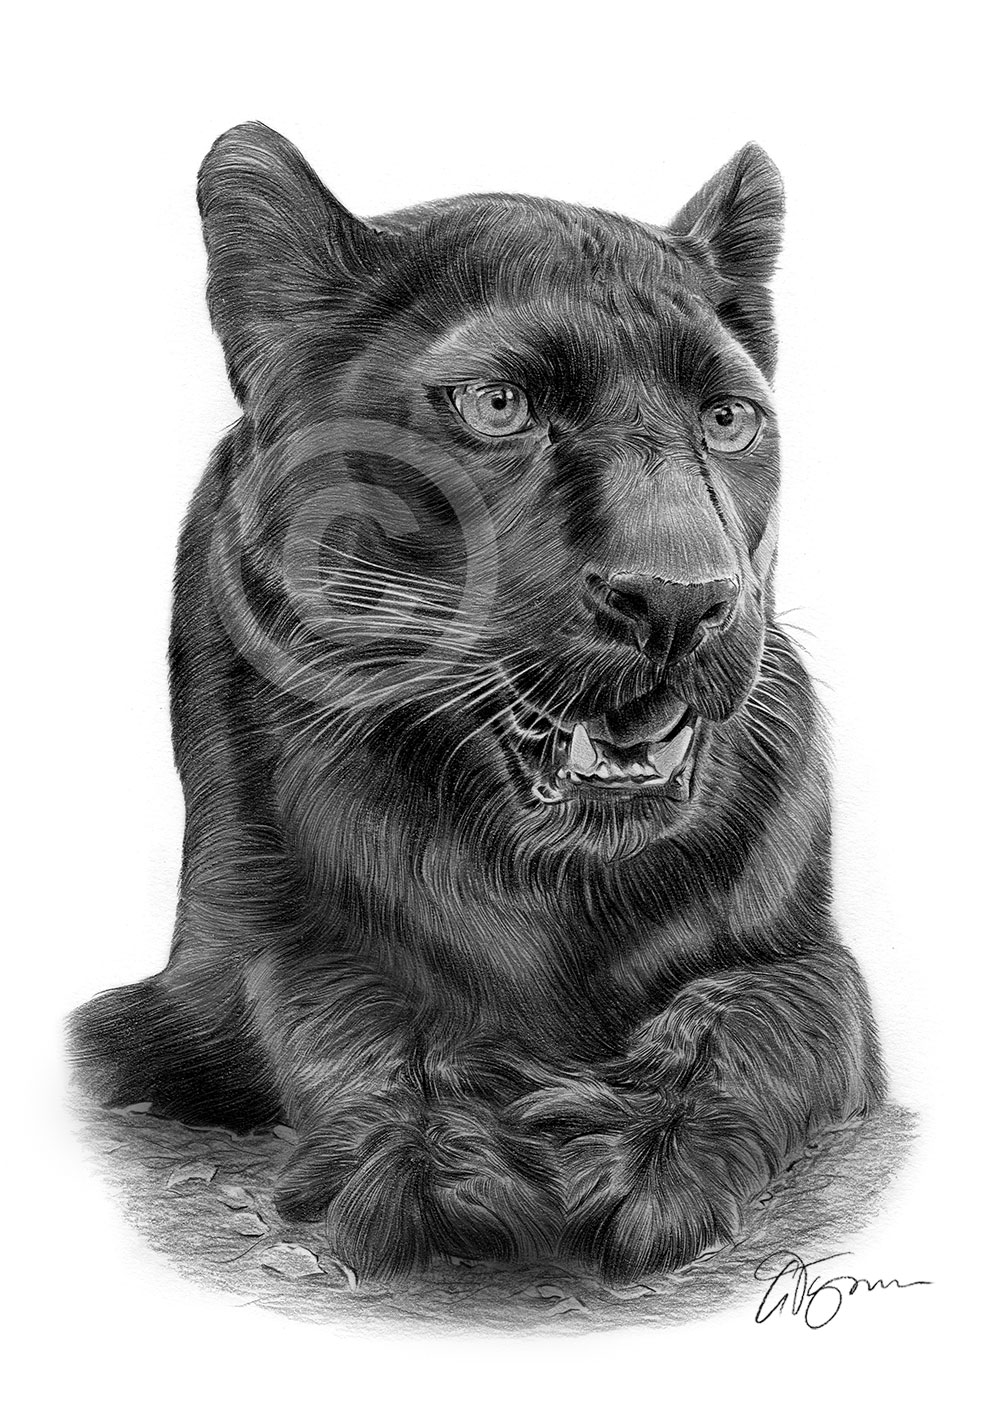 Pencil drawing of a young black panther by UK artist Gary Tymon